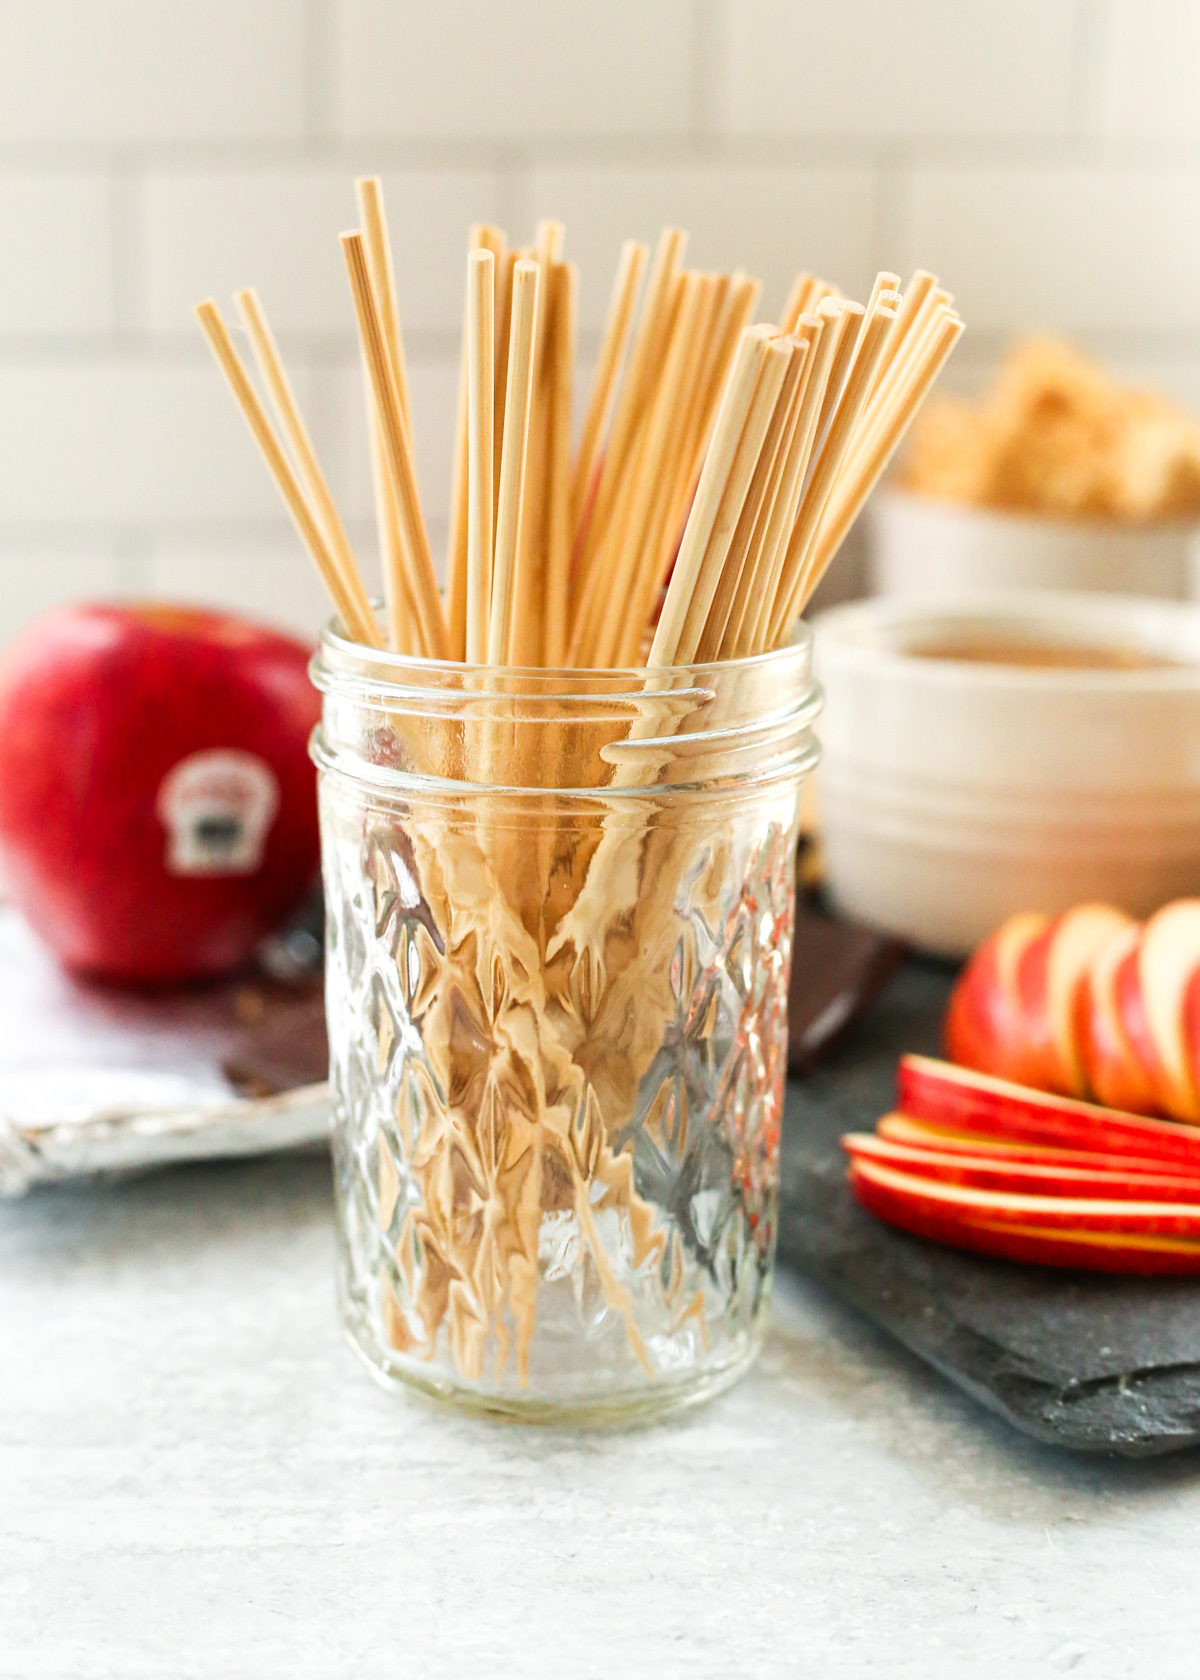 A small clear mason jar holds mini kebab skewers, intended to be used to toast a marshmallow for a s'more, with a dessert board that includes apple slices visible in the background